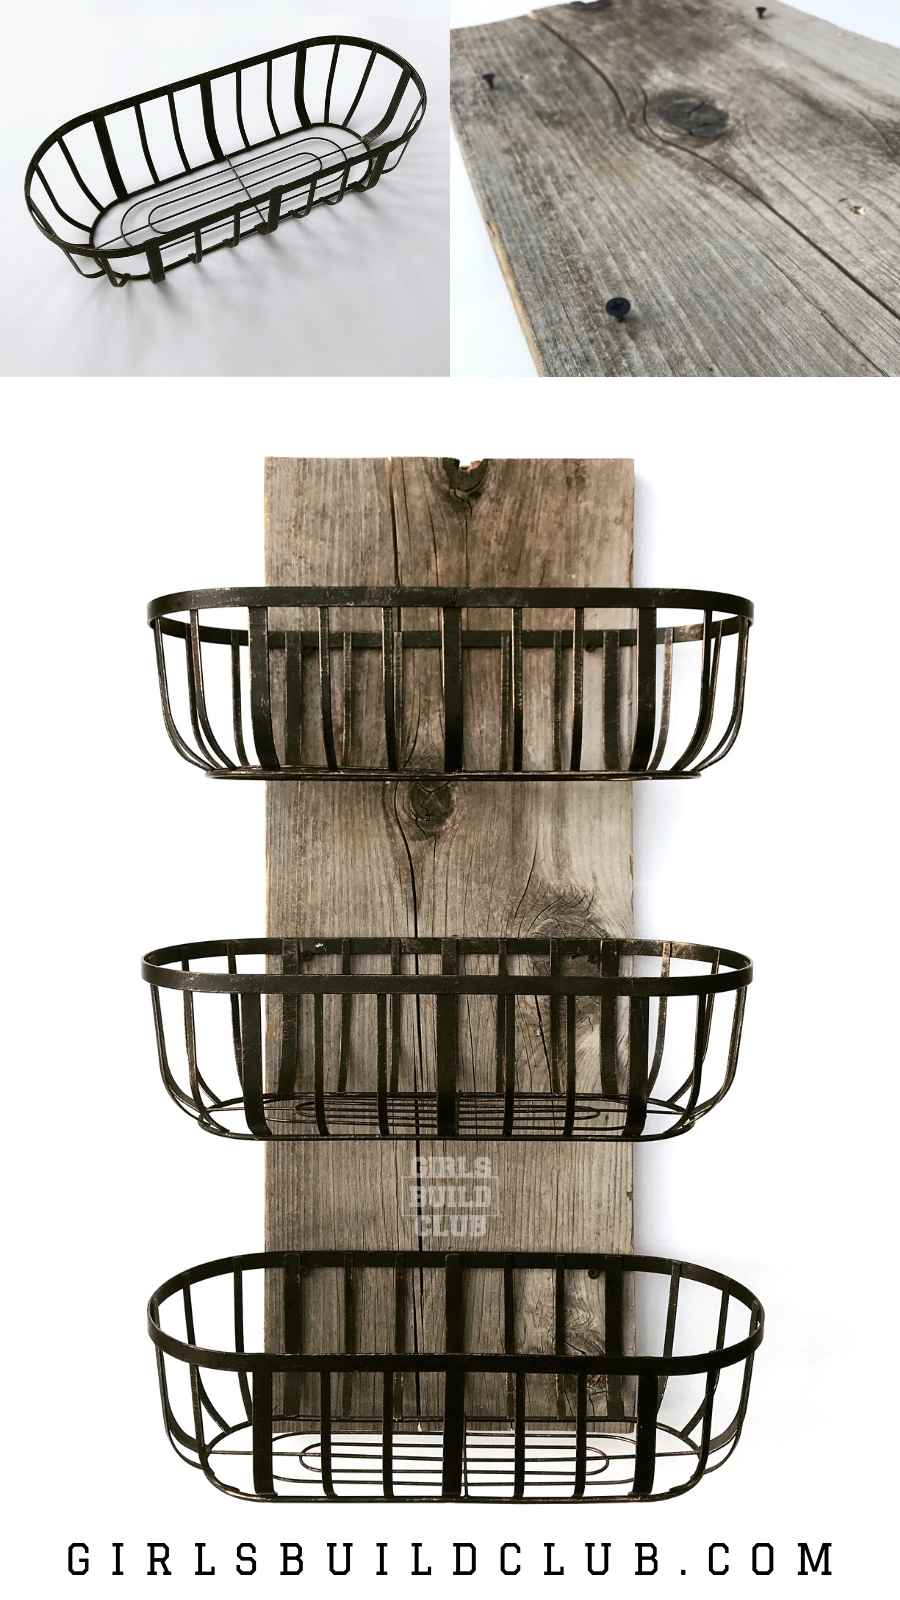 This is the easiest farmhouse decor diy ever! Now it holds our towels in our farmhouse kitchen but could be used in a bathroom, too. I got these wire baskets at Walmart and attached them to a rustic weathered wood board. Would look great as rustic cabin decor, too. Click through to the full tutorial